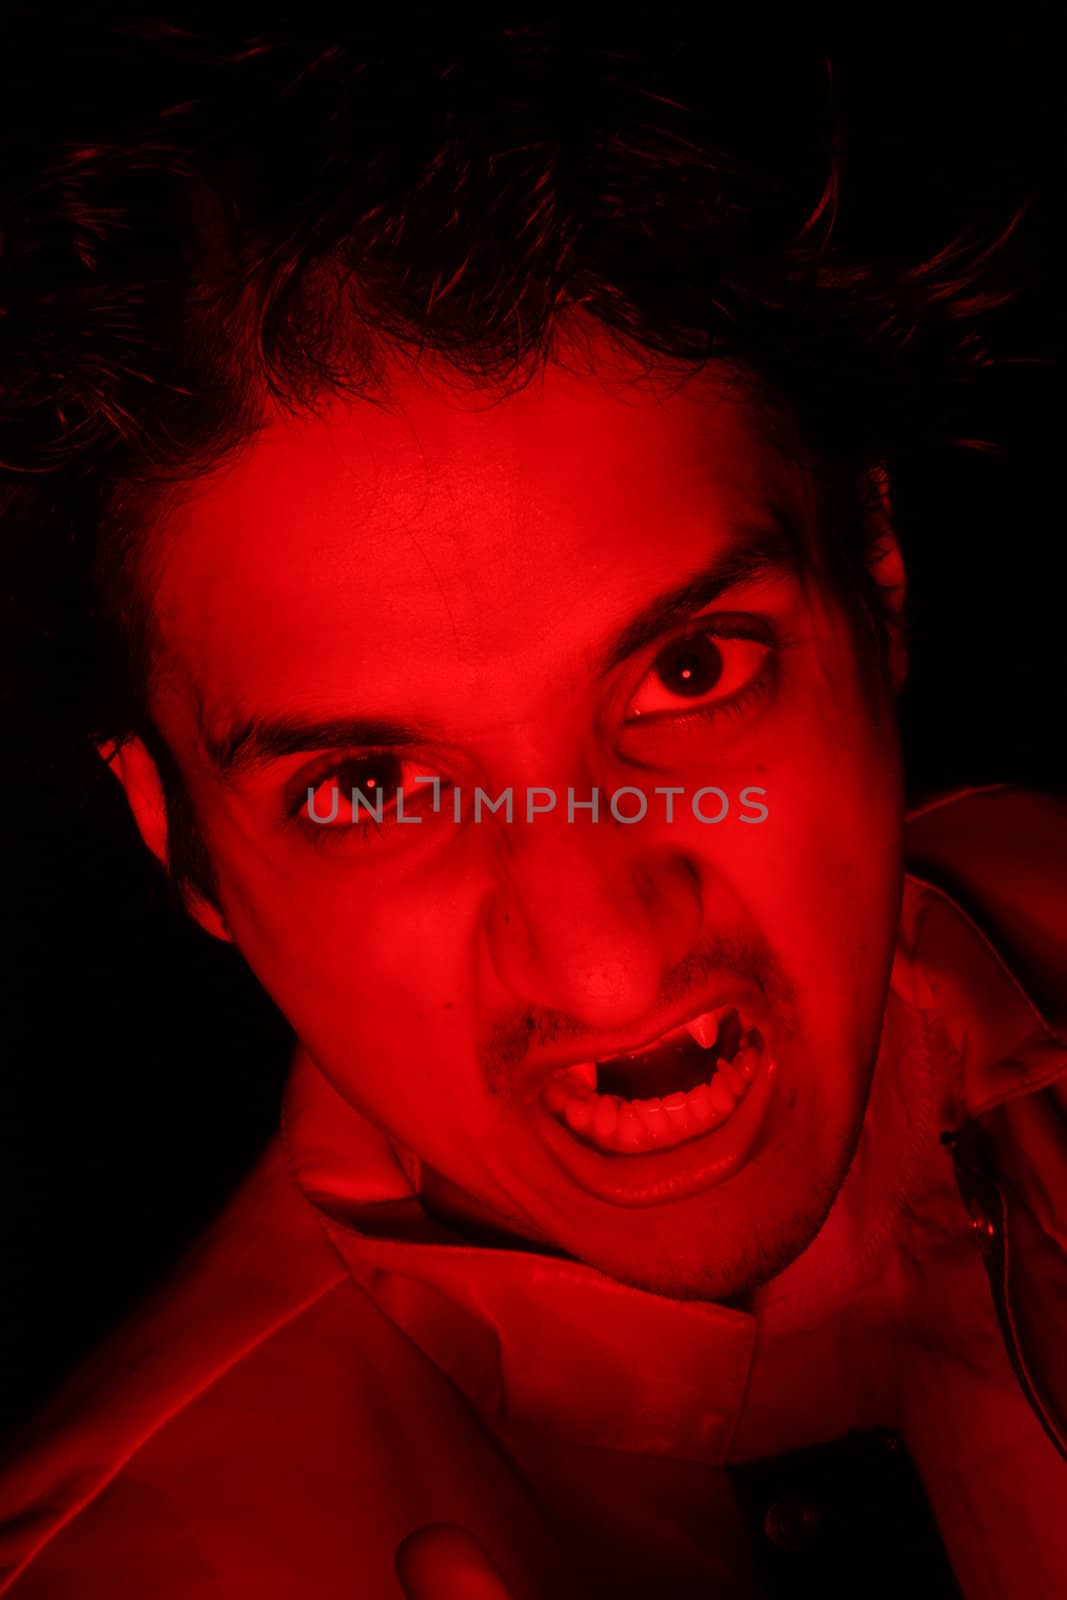 A portrait of an Indian vampire.